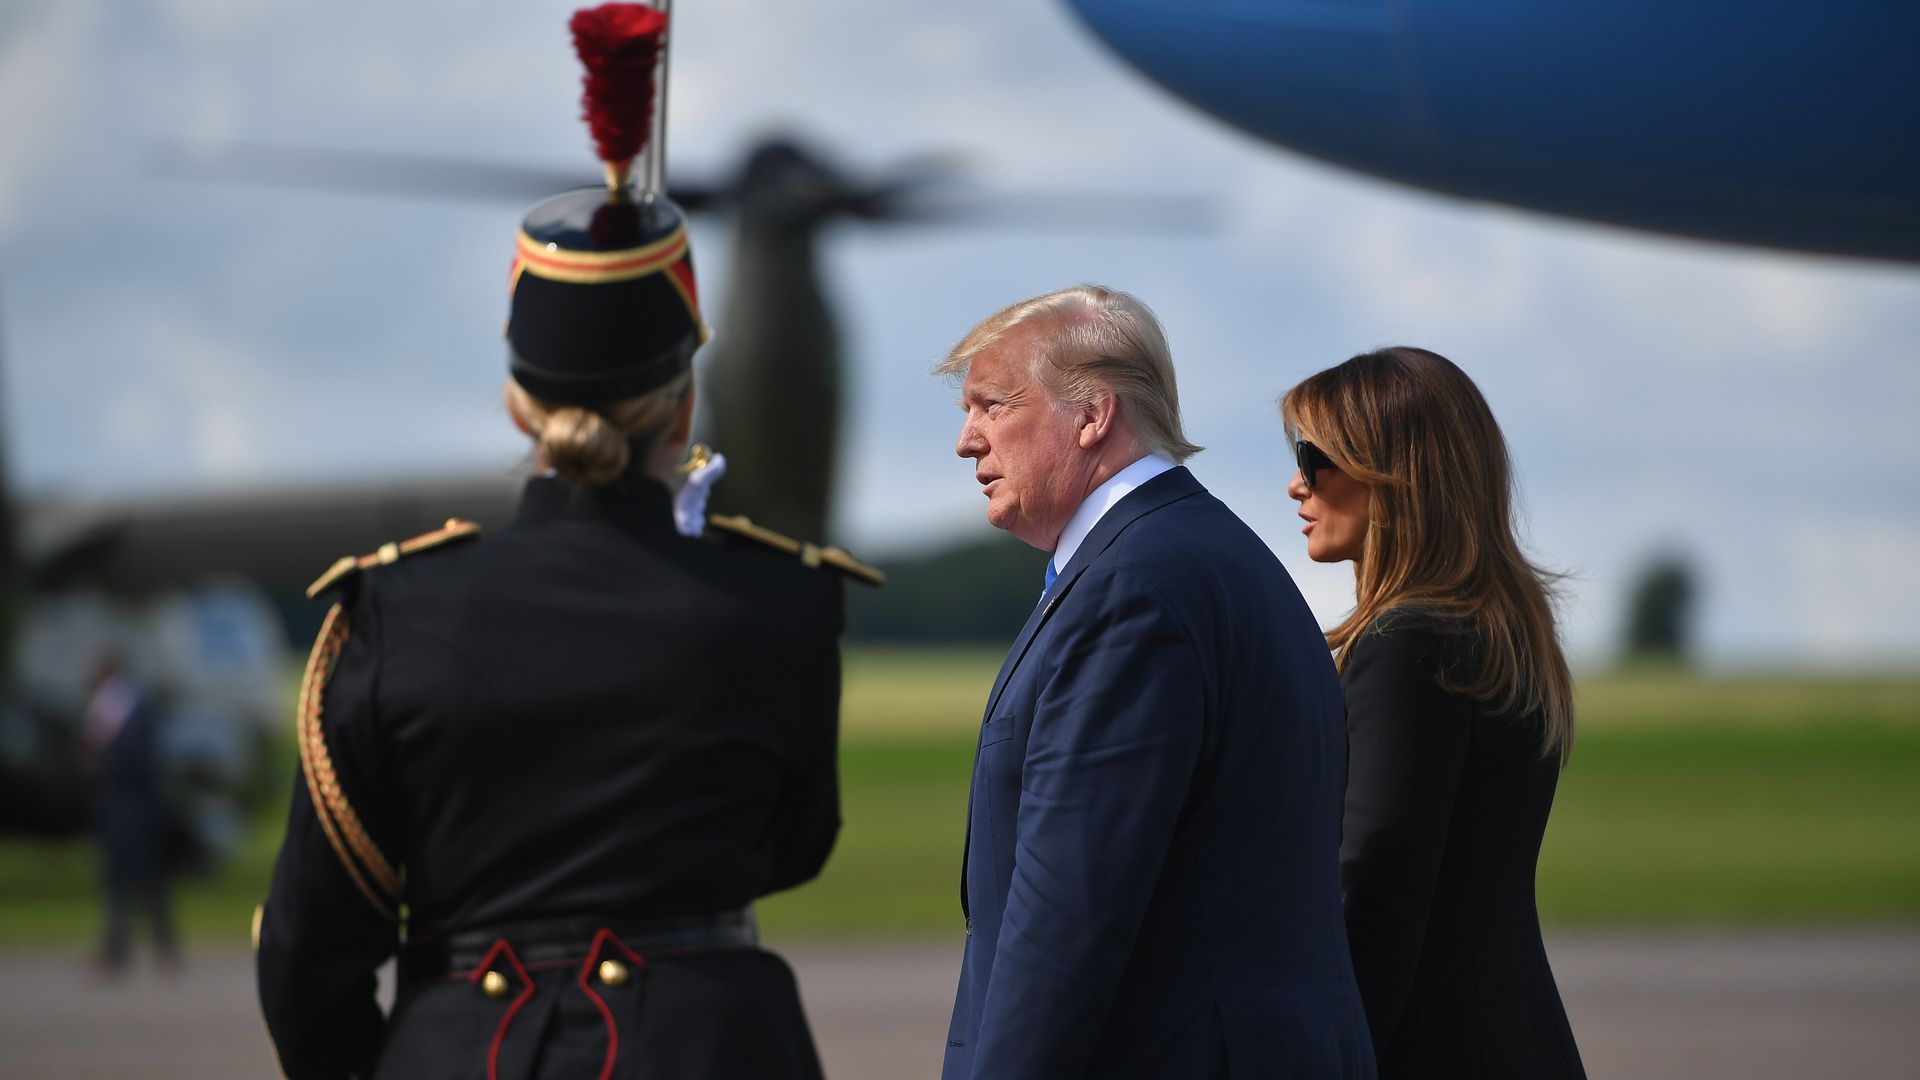 President Trump and First Lady Melania Trump after disembarking from Air Force One at Caen-Carpiquet Airport in Carpiquet, Normandy. Photo: Mandel Ngan/AFP/Getty Images